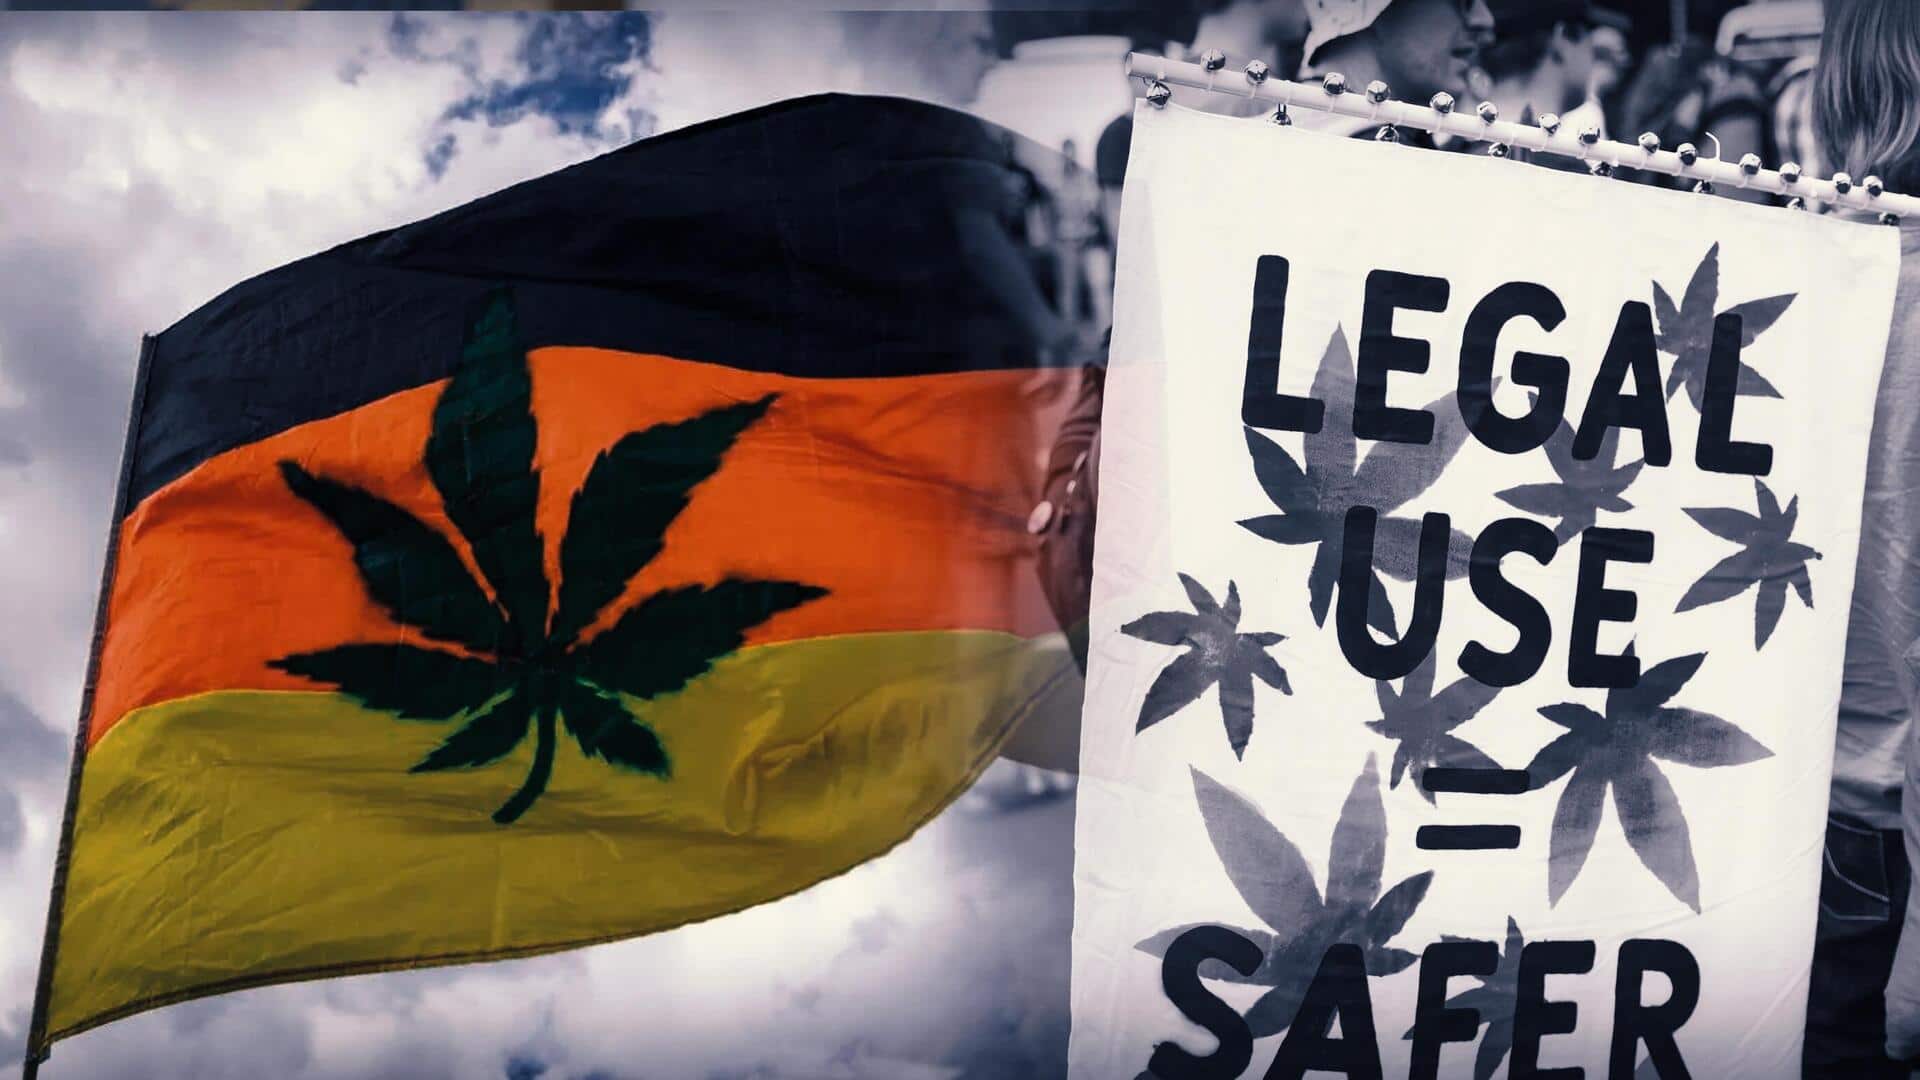 Germany legalizes personal use of cannabis for adults